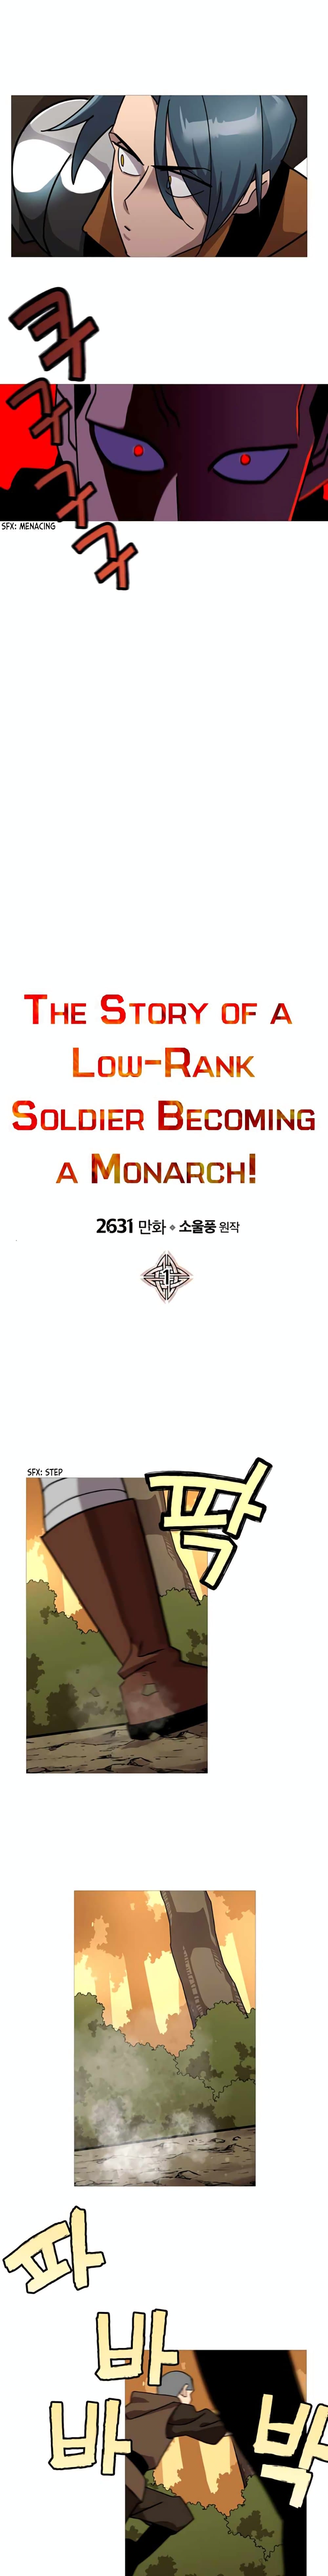 The Story of a Low Rank Soldier Becoming a Monarch 1 08